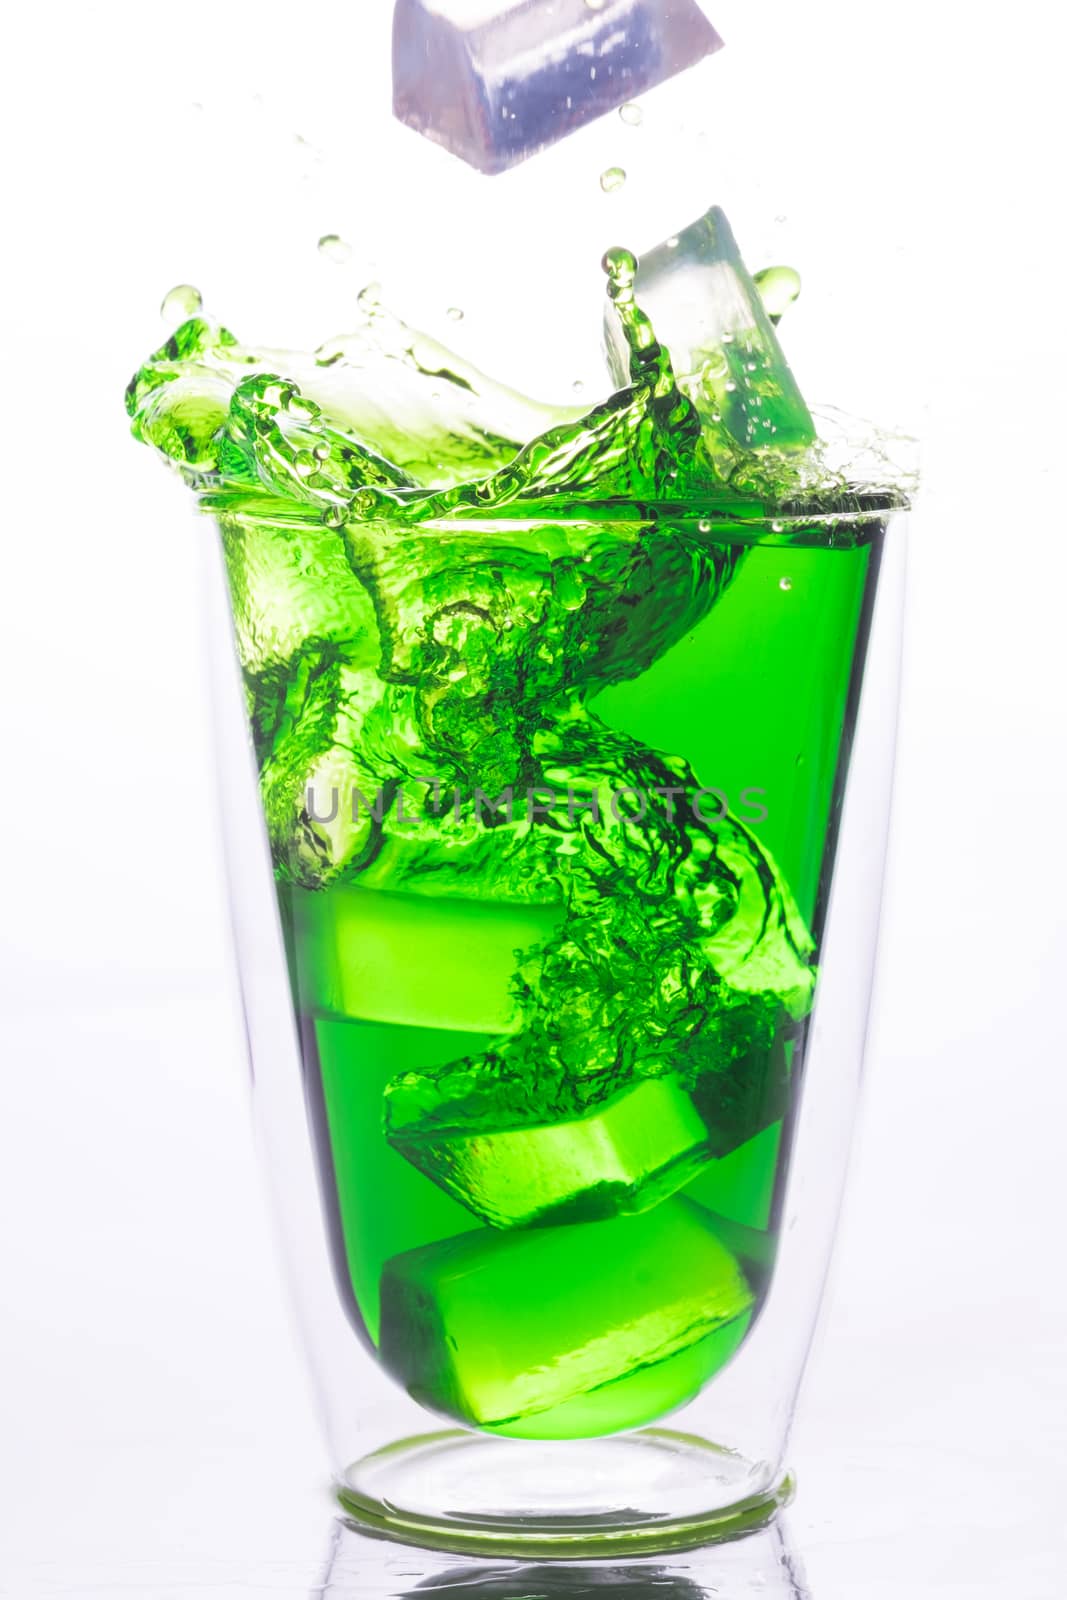 ice drop to glass of green water, green water splash out the glass